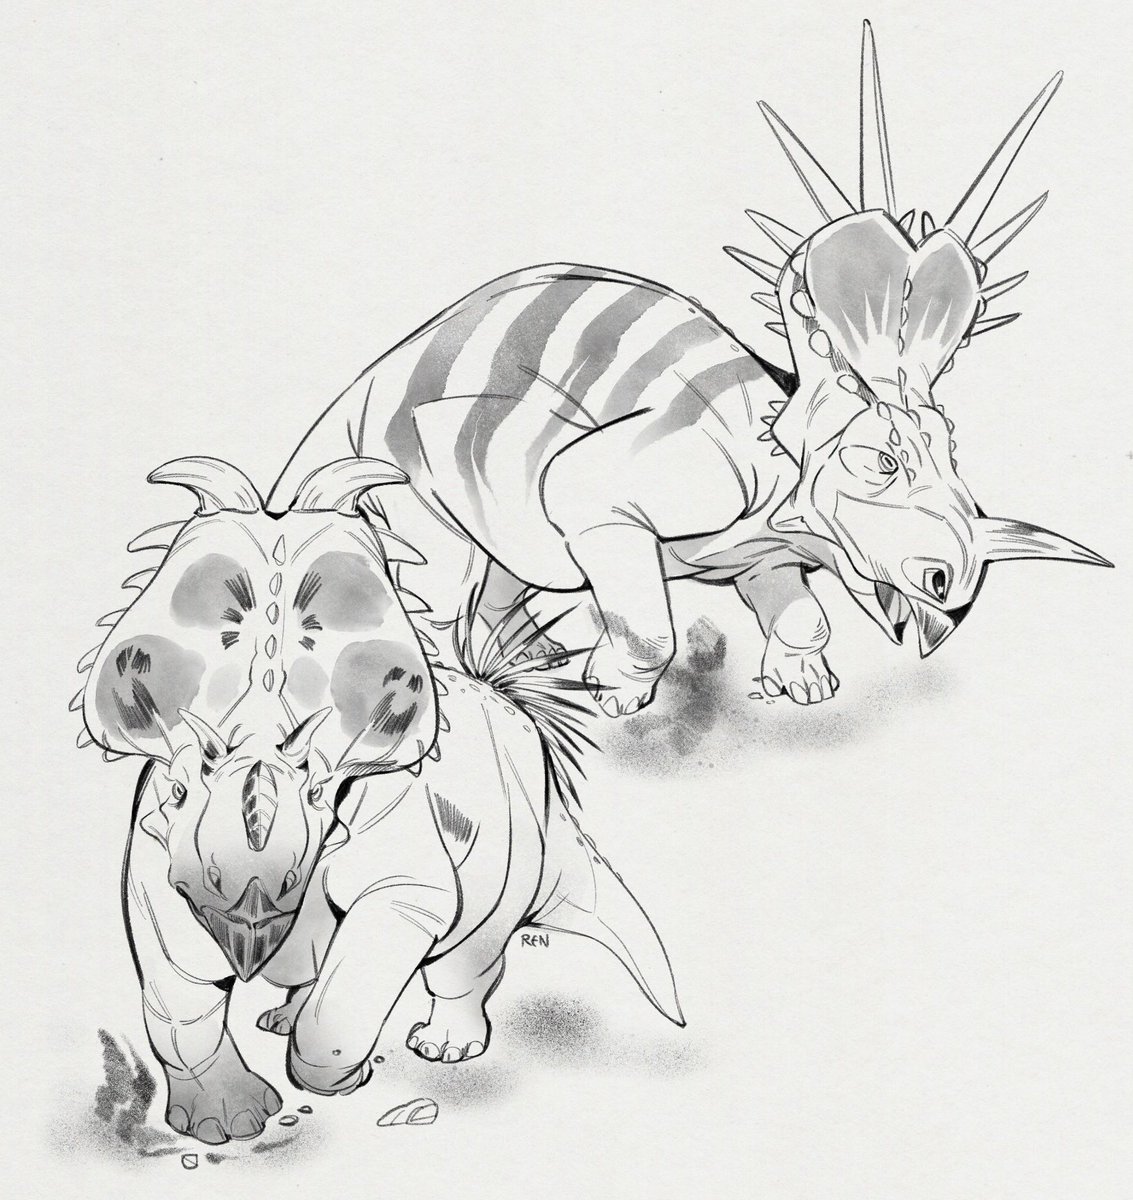 Some grumpy Ceratopsid sketches… at least they always seem to be a little grumpy in Path of Titans 